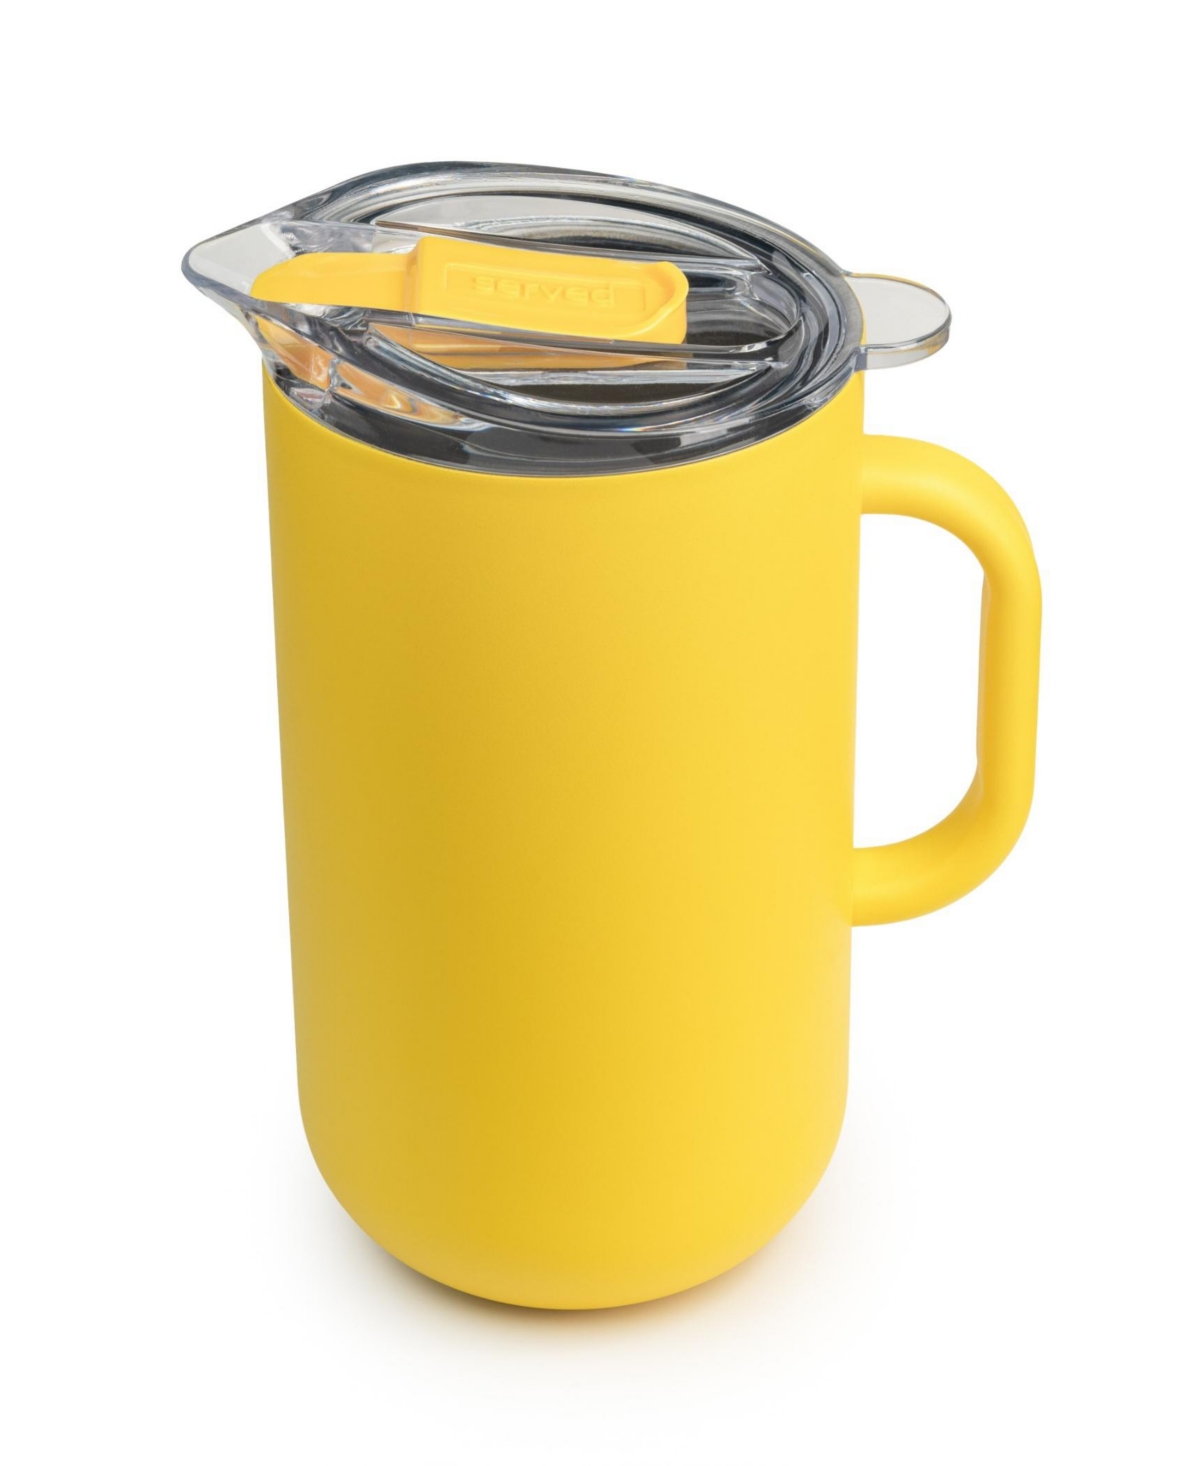 Served Vacuum-insulated Double-walled Copper-lined Stainless Steel Pitcher, 2 Liter In Saffron